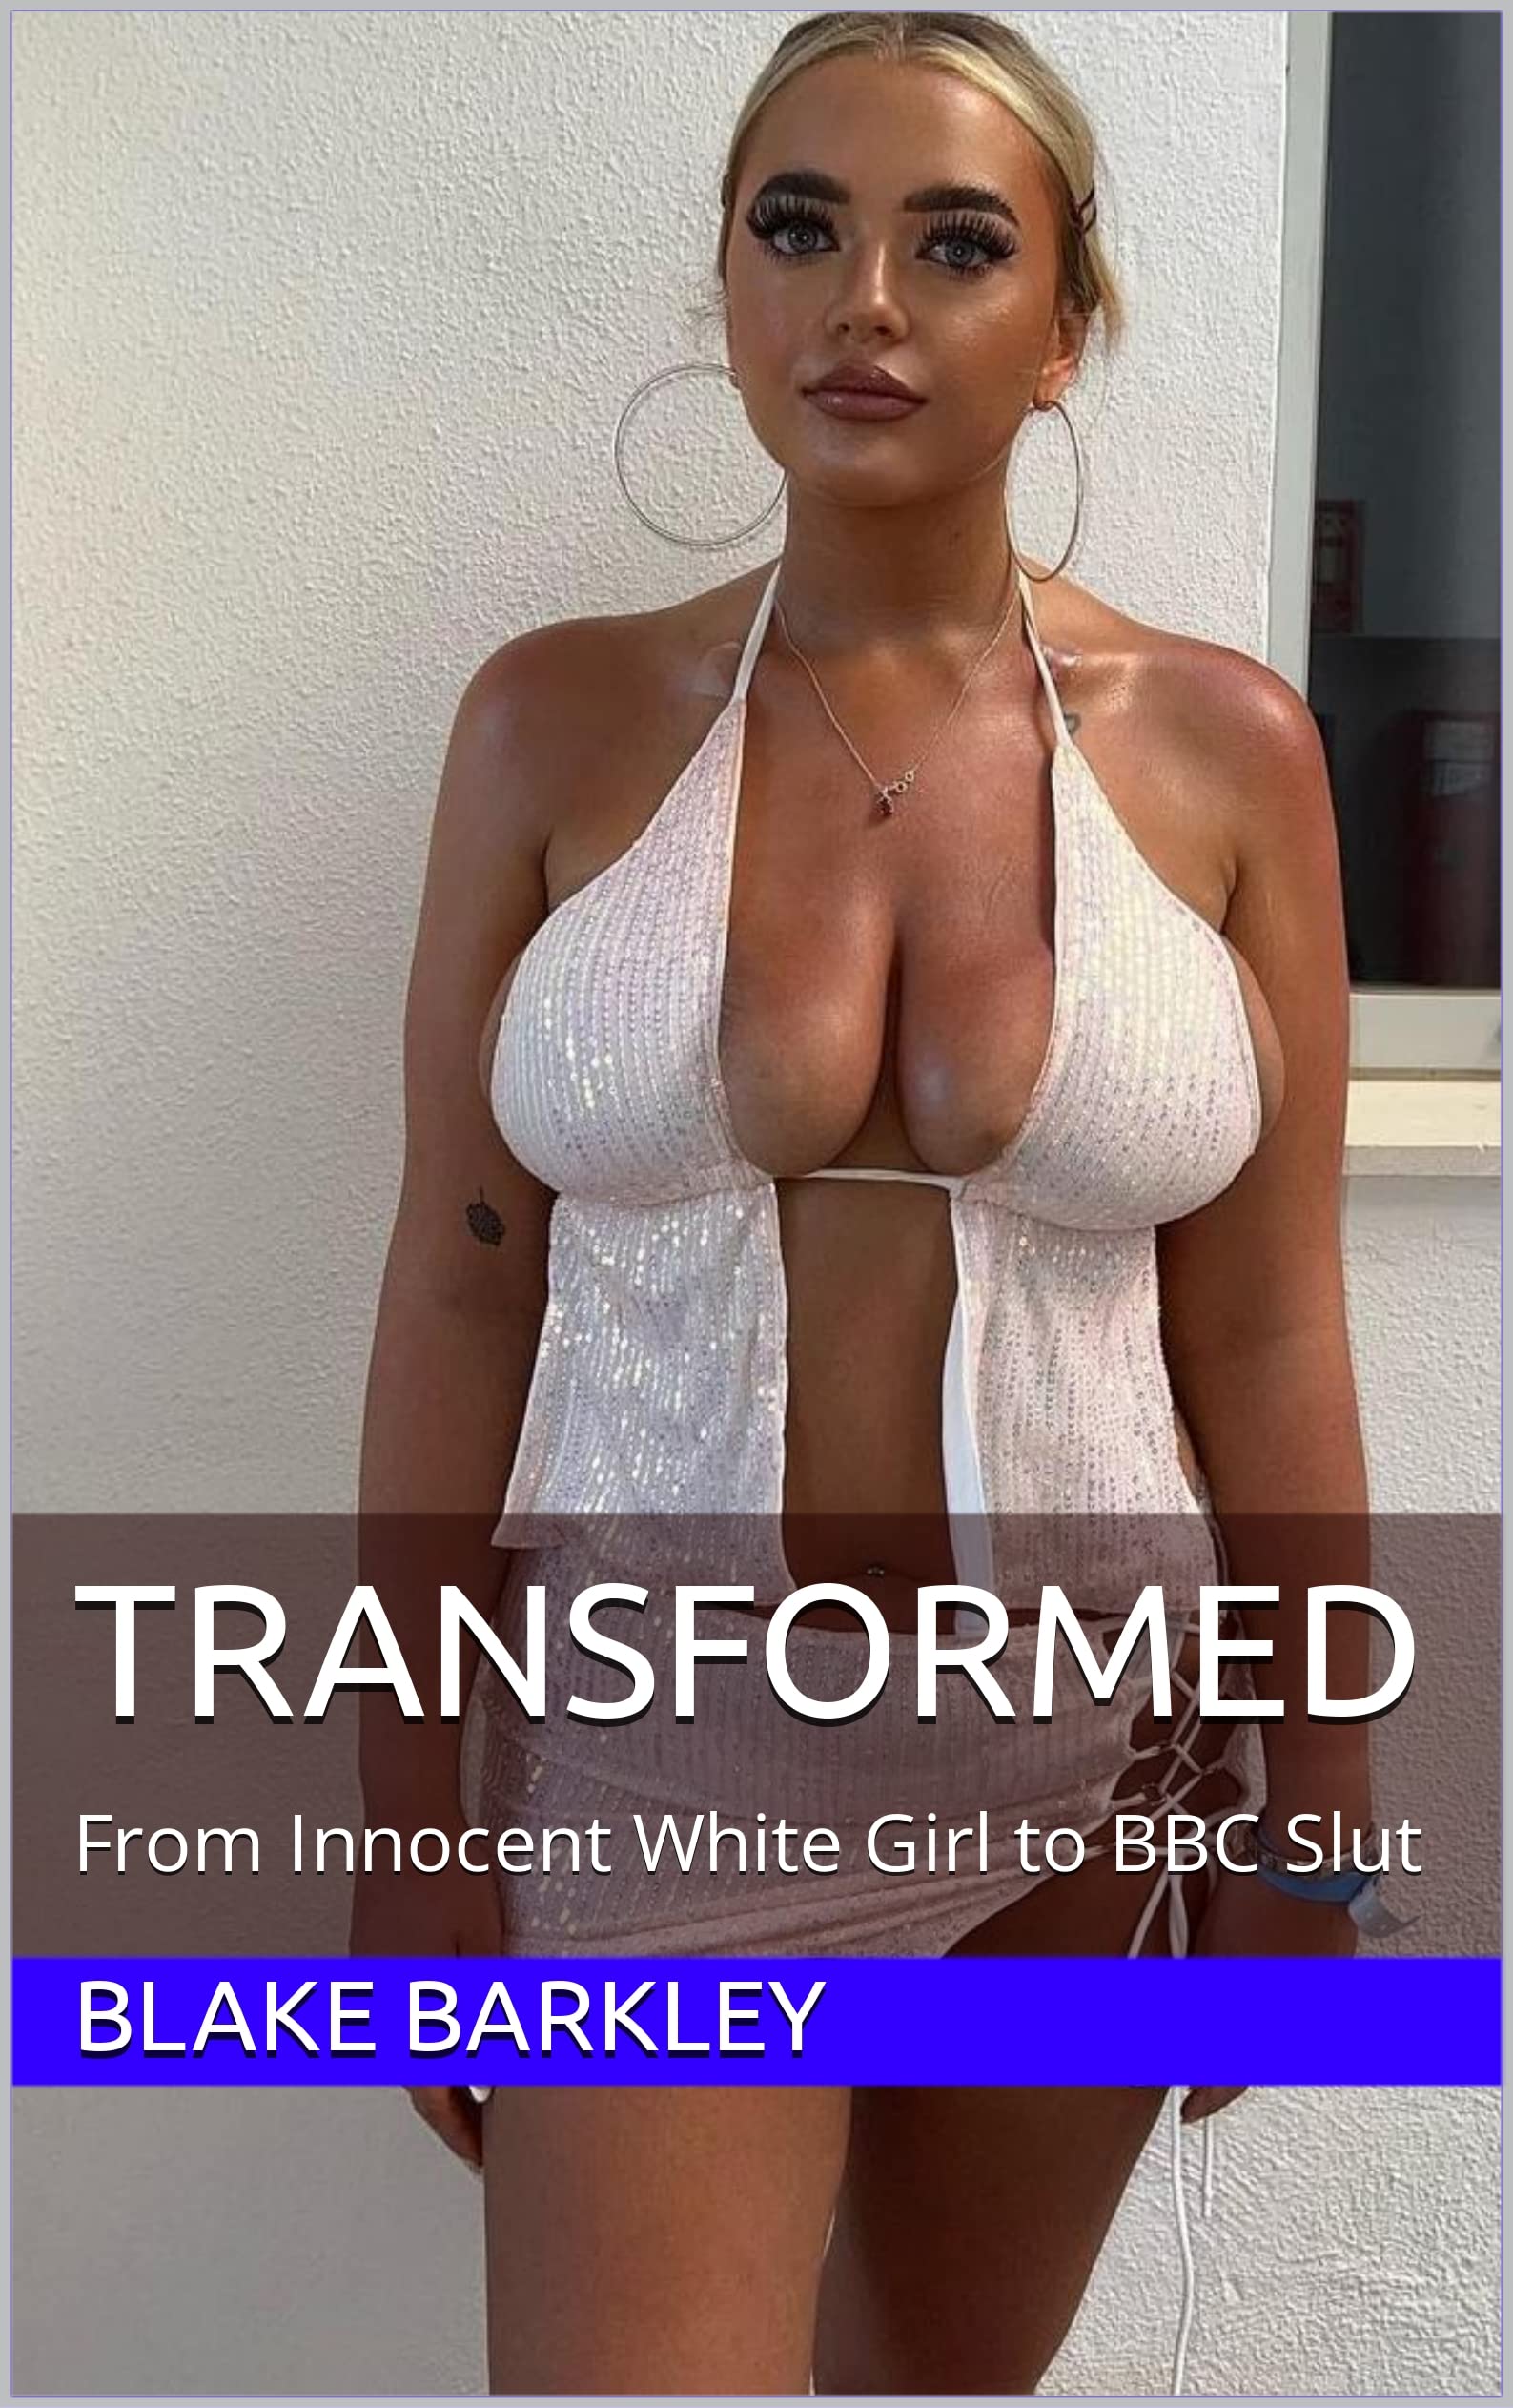 chris stacer recommends transformed into a slut pic